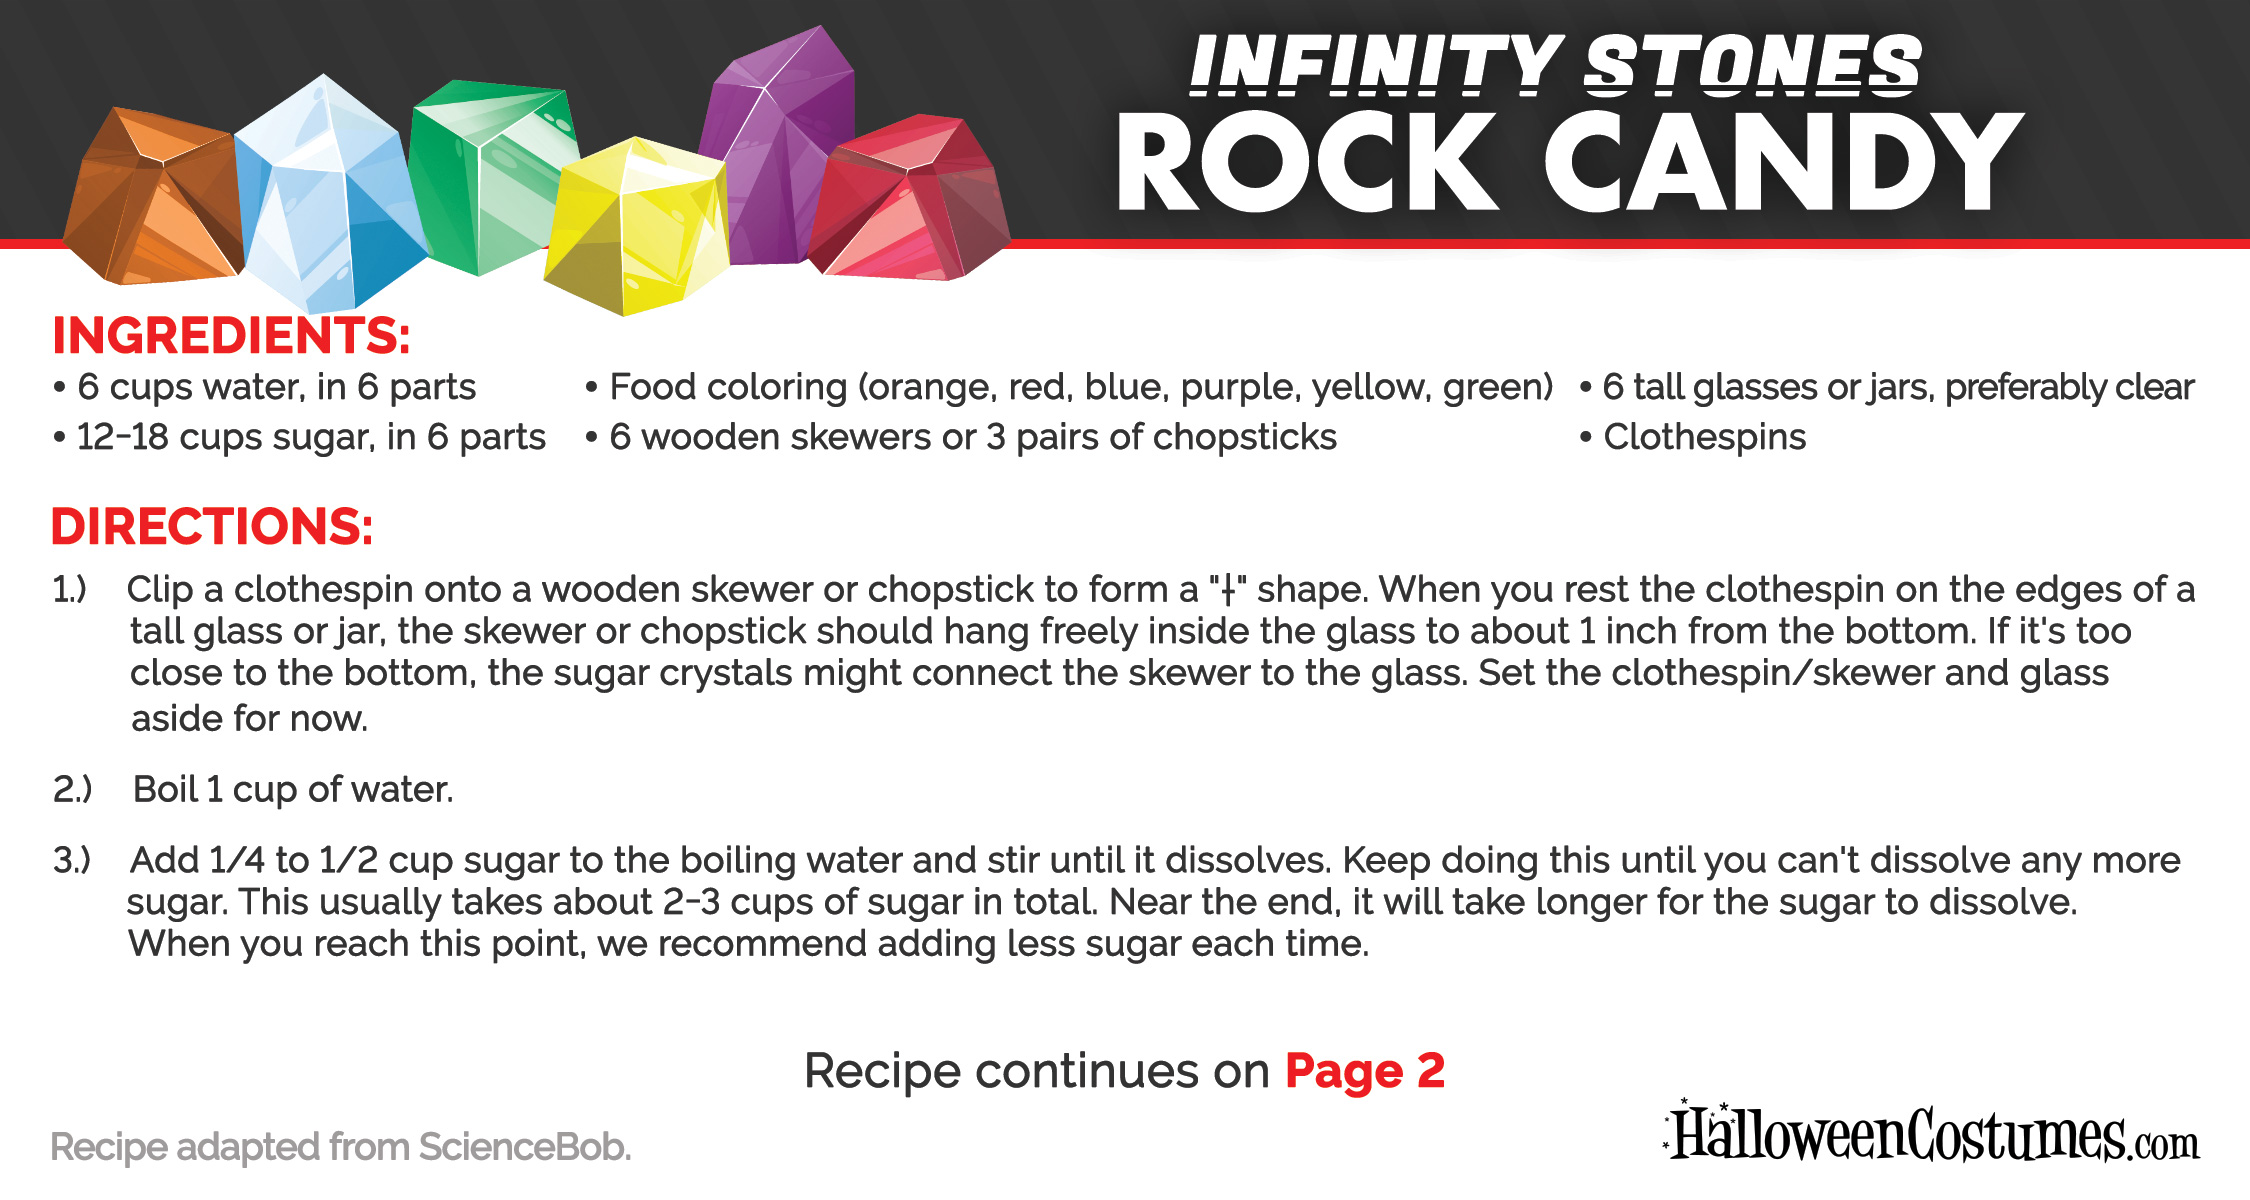 The Avengers Rock Candy Infinity Stones Recipe, Page 1